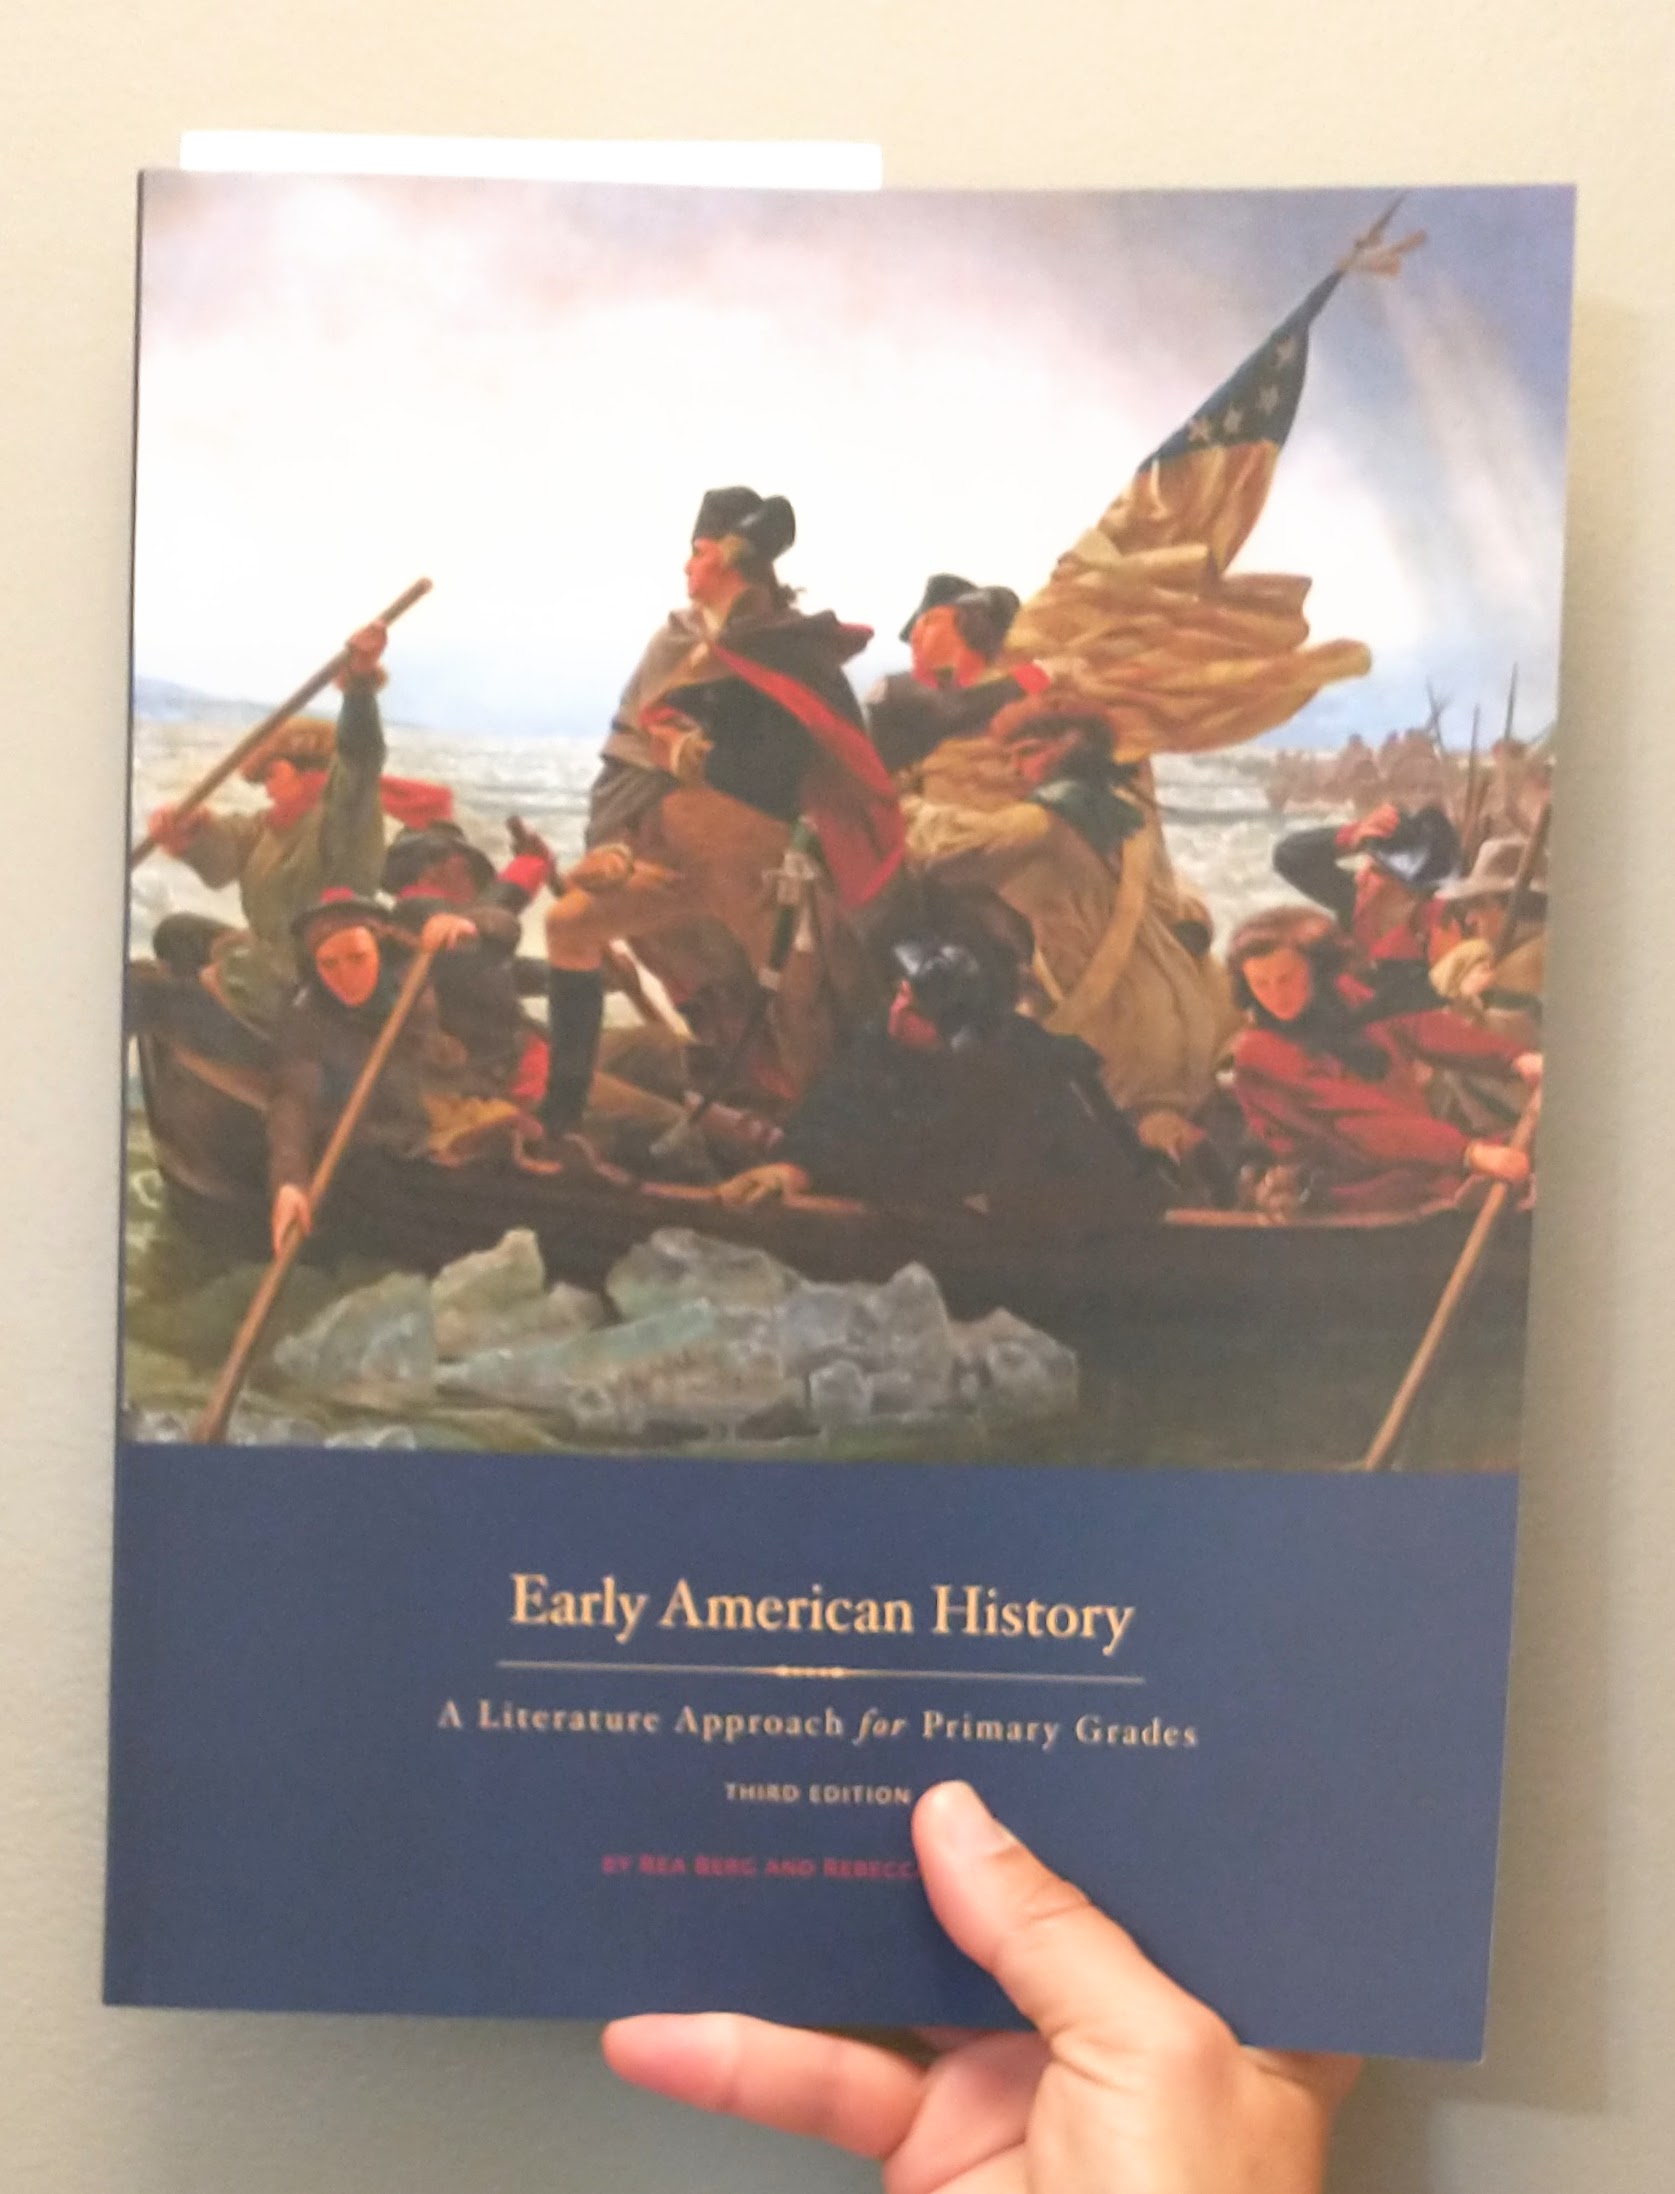 using literature to teach american history